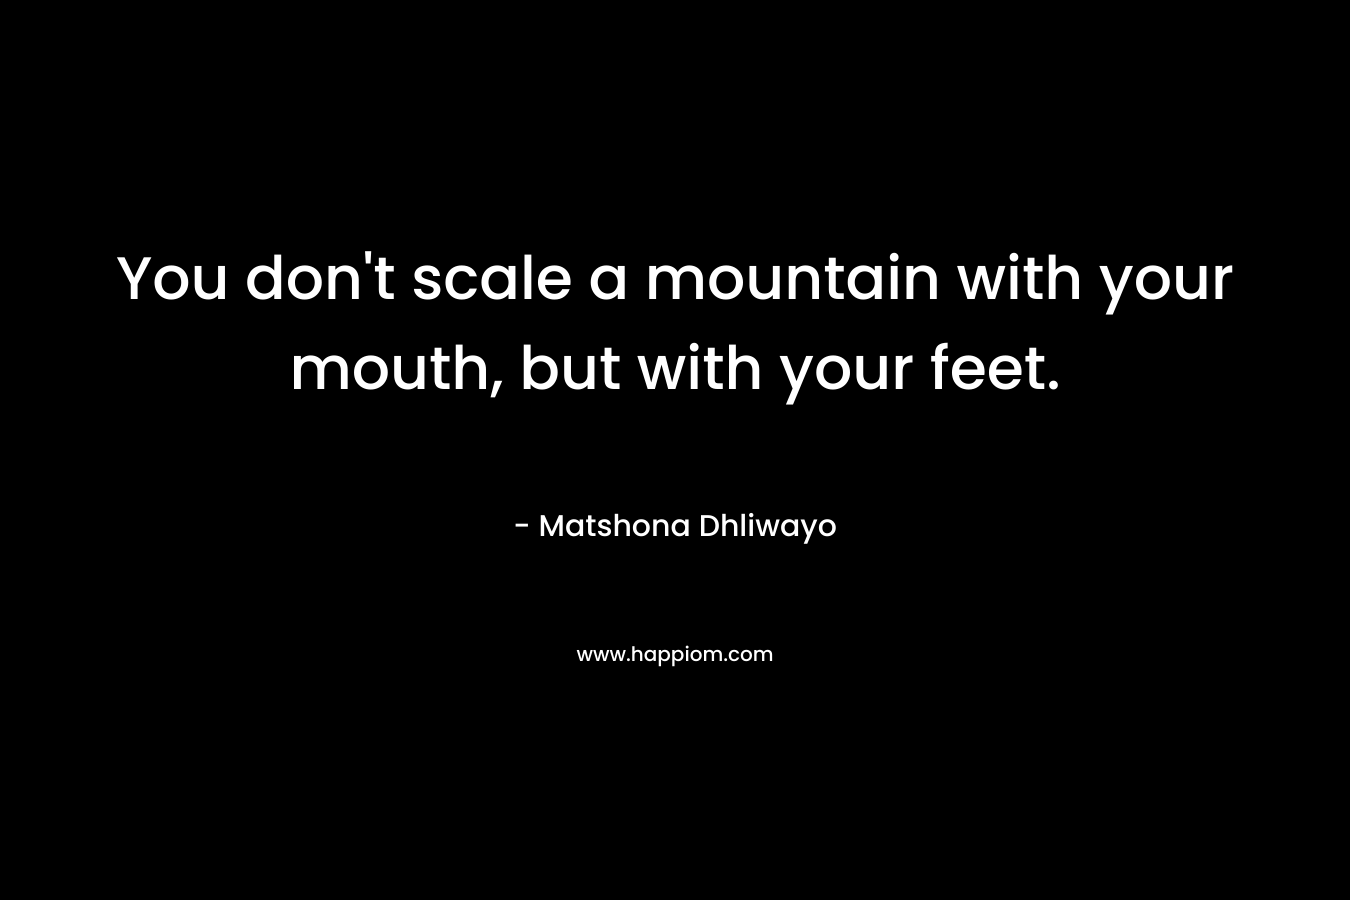 You don't scale a mountain with your mouth, but with your feet.